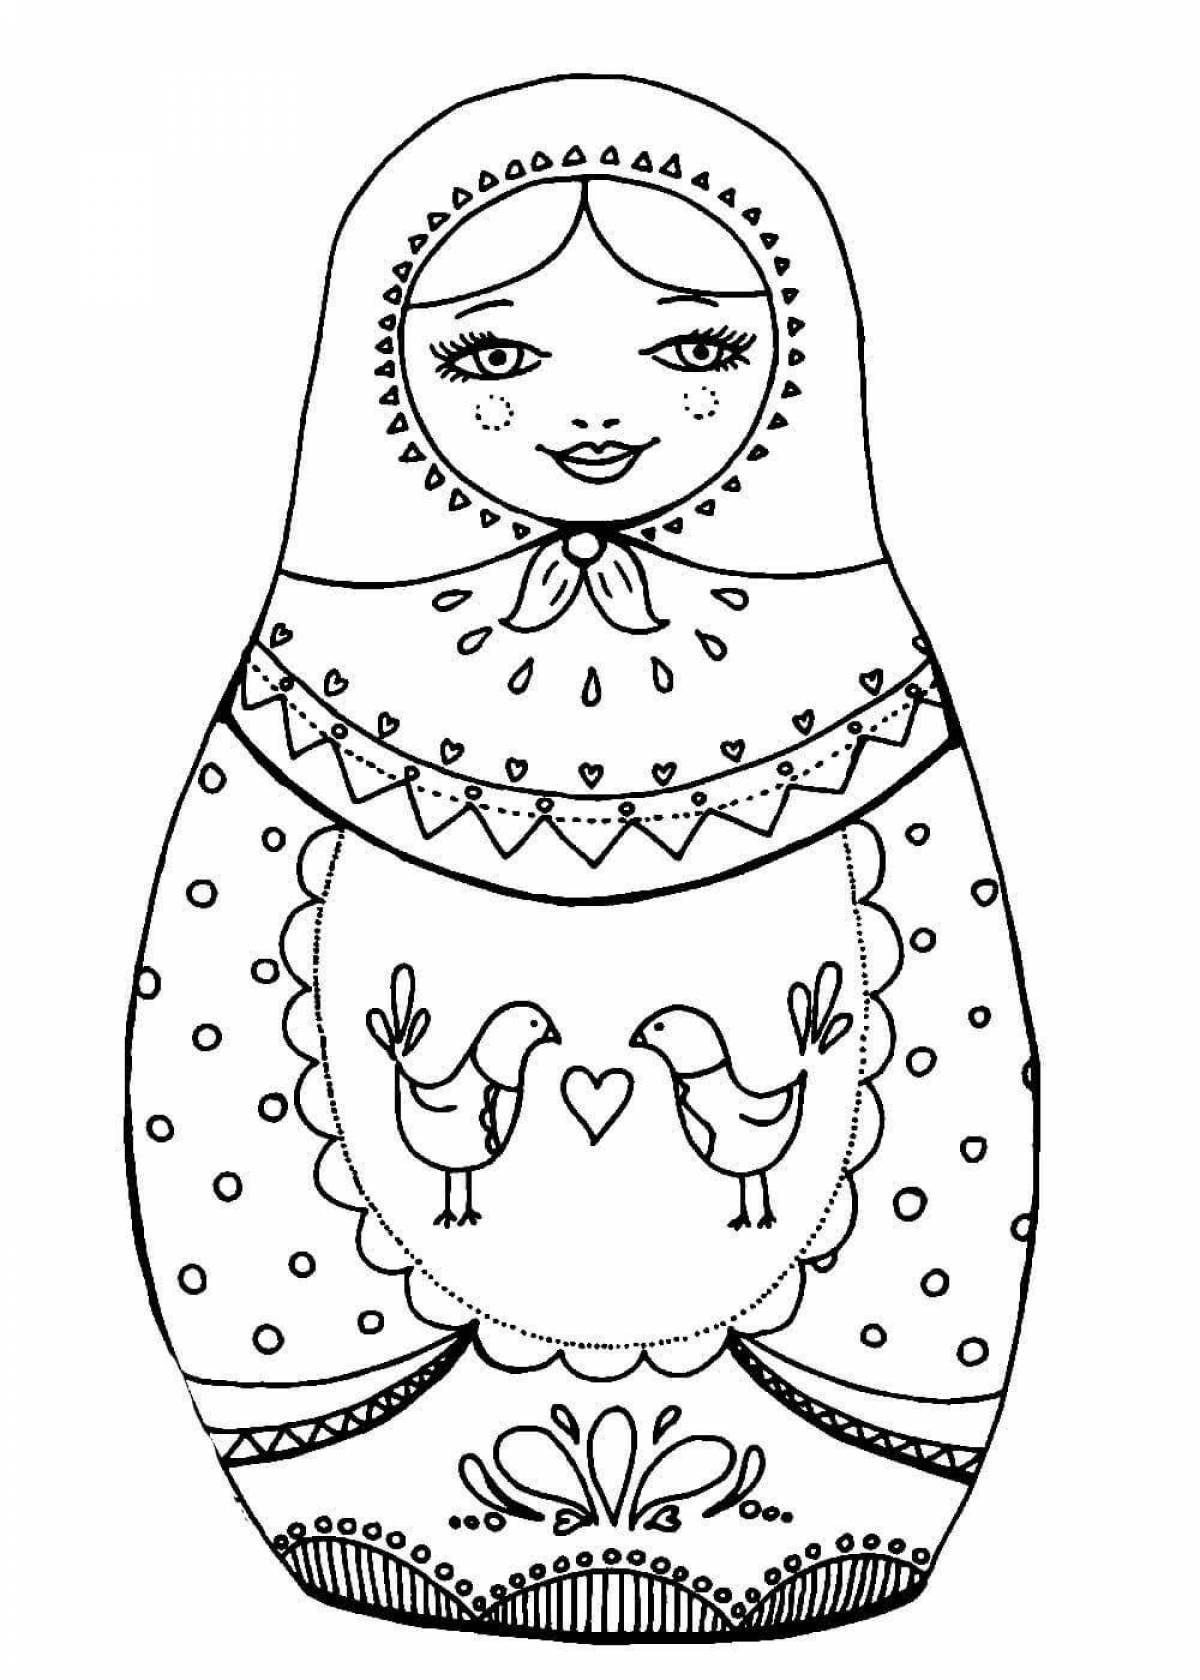 Merry matryoshka coloring book for kids